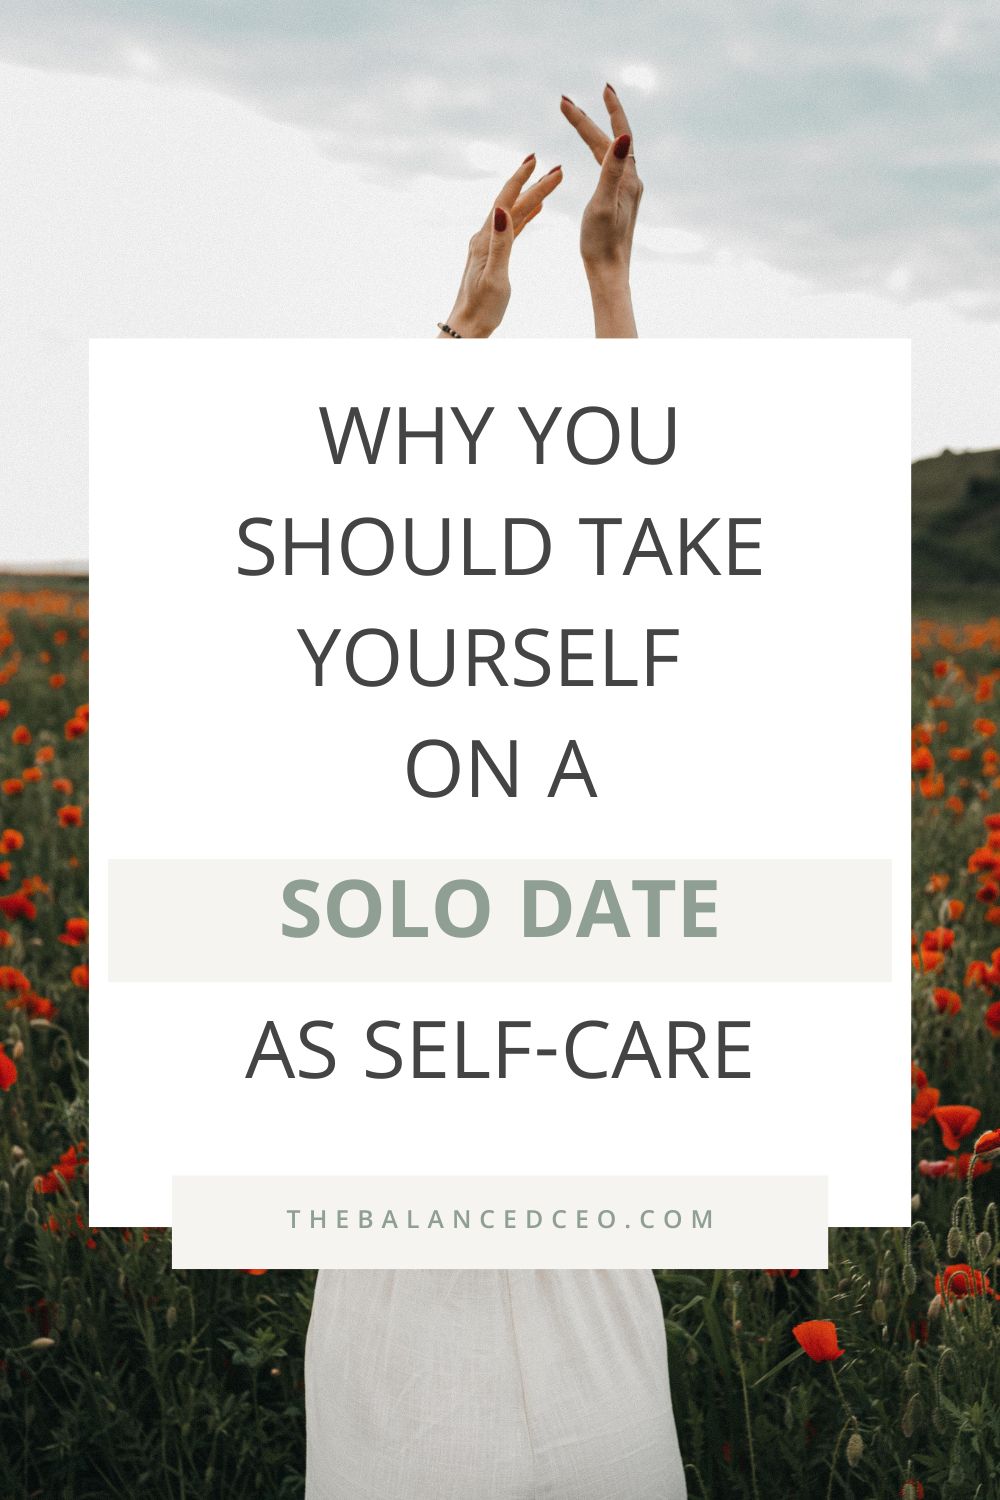 Why You Should Take Yourself on a Solo Date as Self-Care